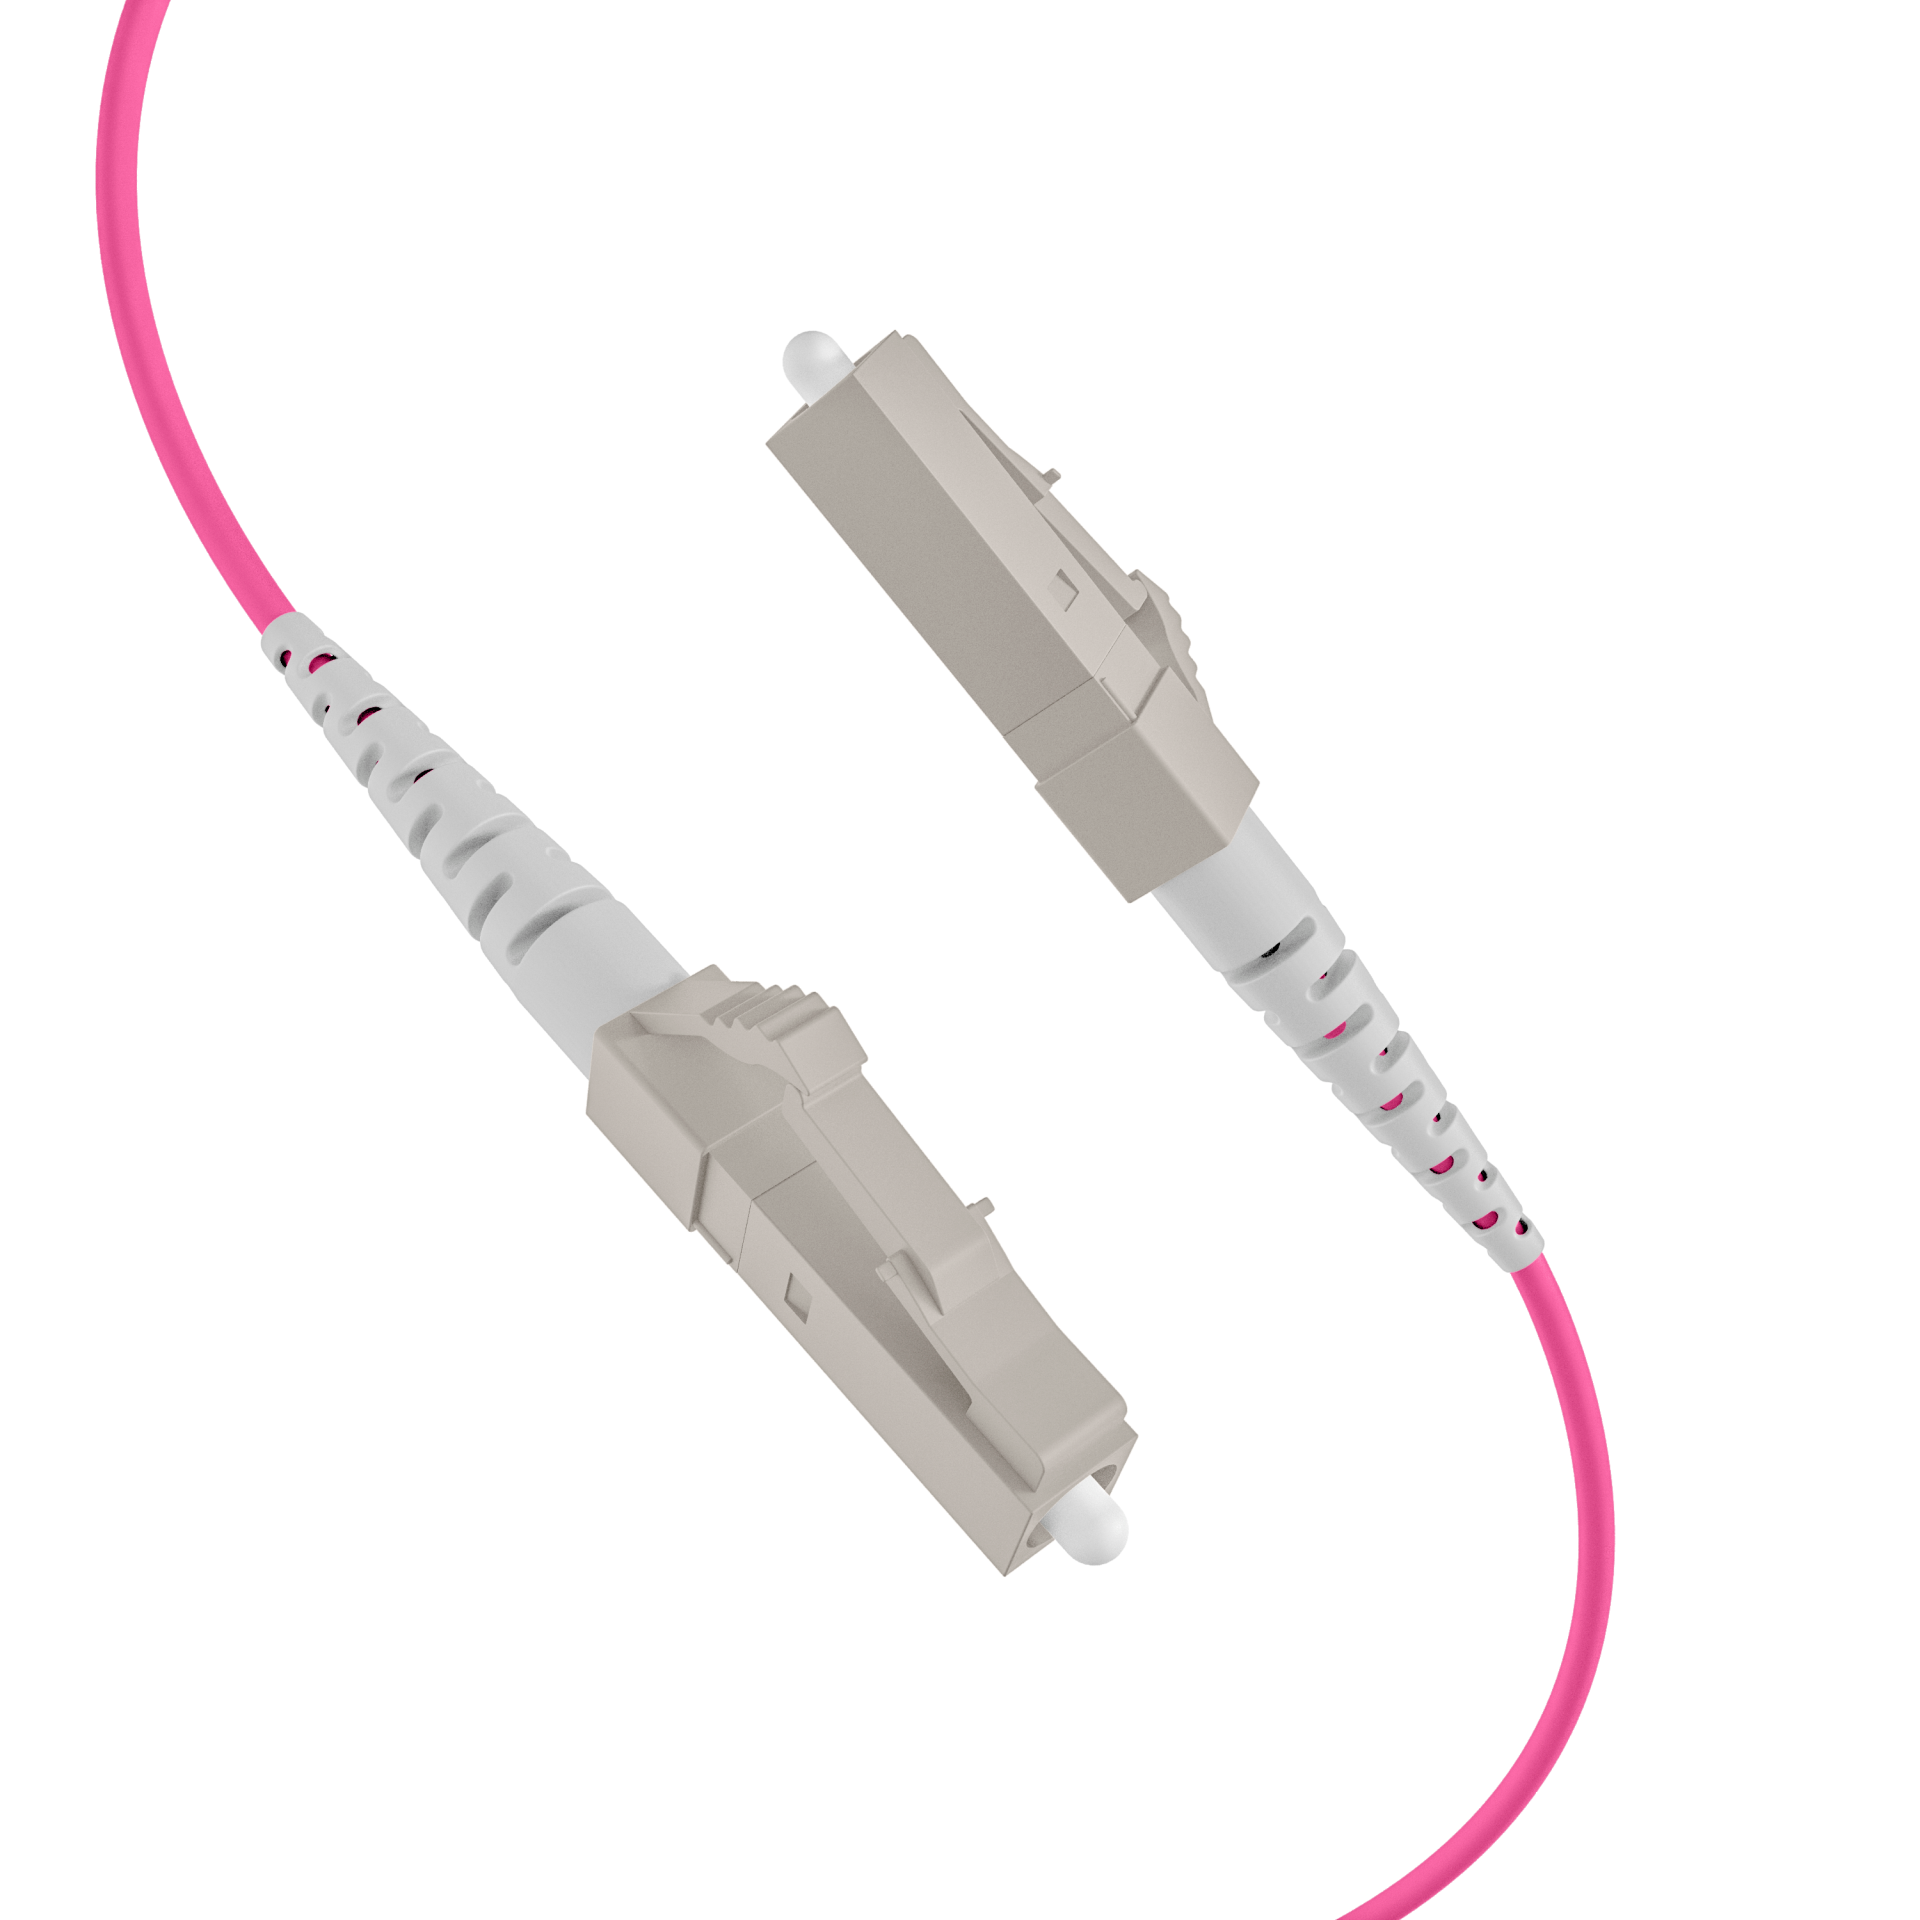 Trunkcable U-DQ(ZN)BH OM4 8G (1x8) LC-LC,120m Dca LSZH